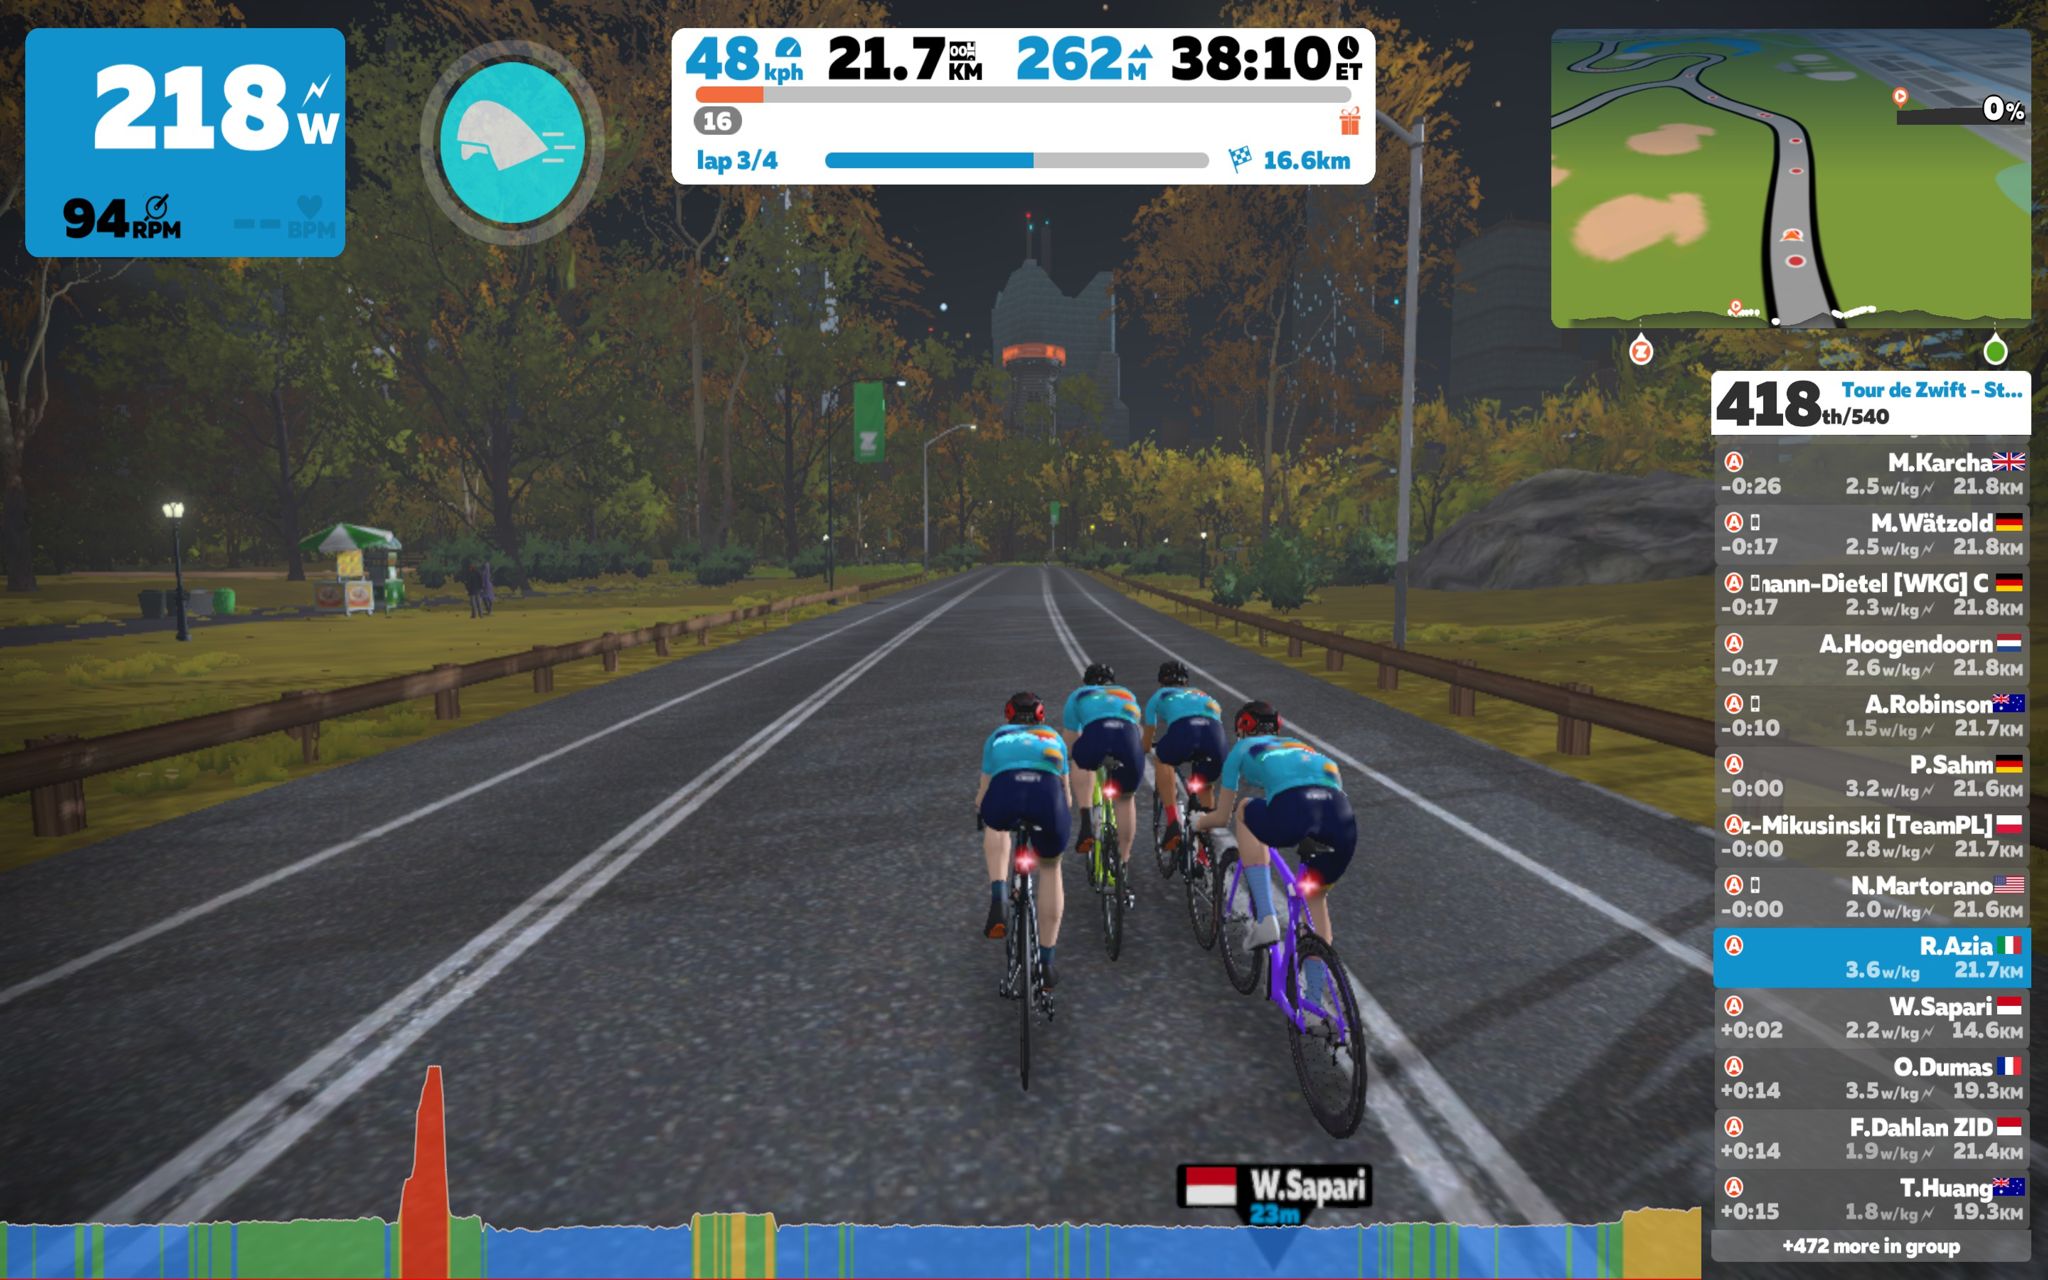 Screen grab from Stage 9 of the Tour de Zwift